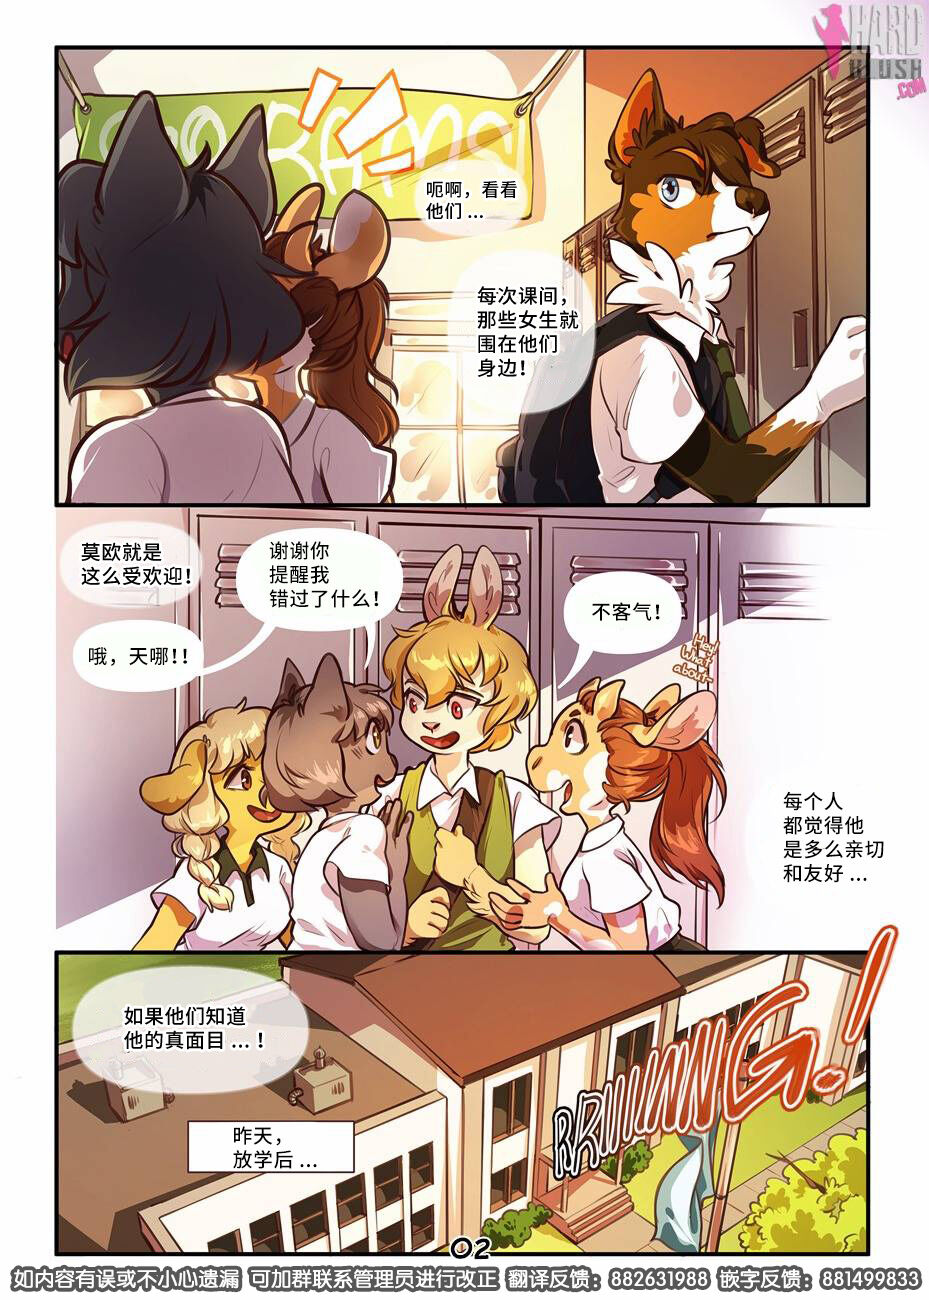 [Thingsmart] Flip Side [Chinese] [逃亡者×真不可视汉化组] [Thingsmart] Flip Side [中国翻訳]